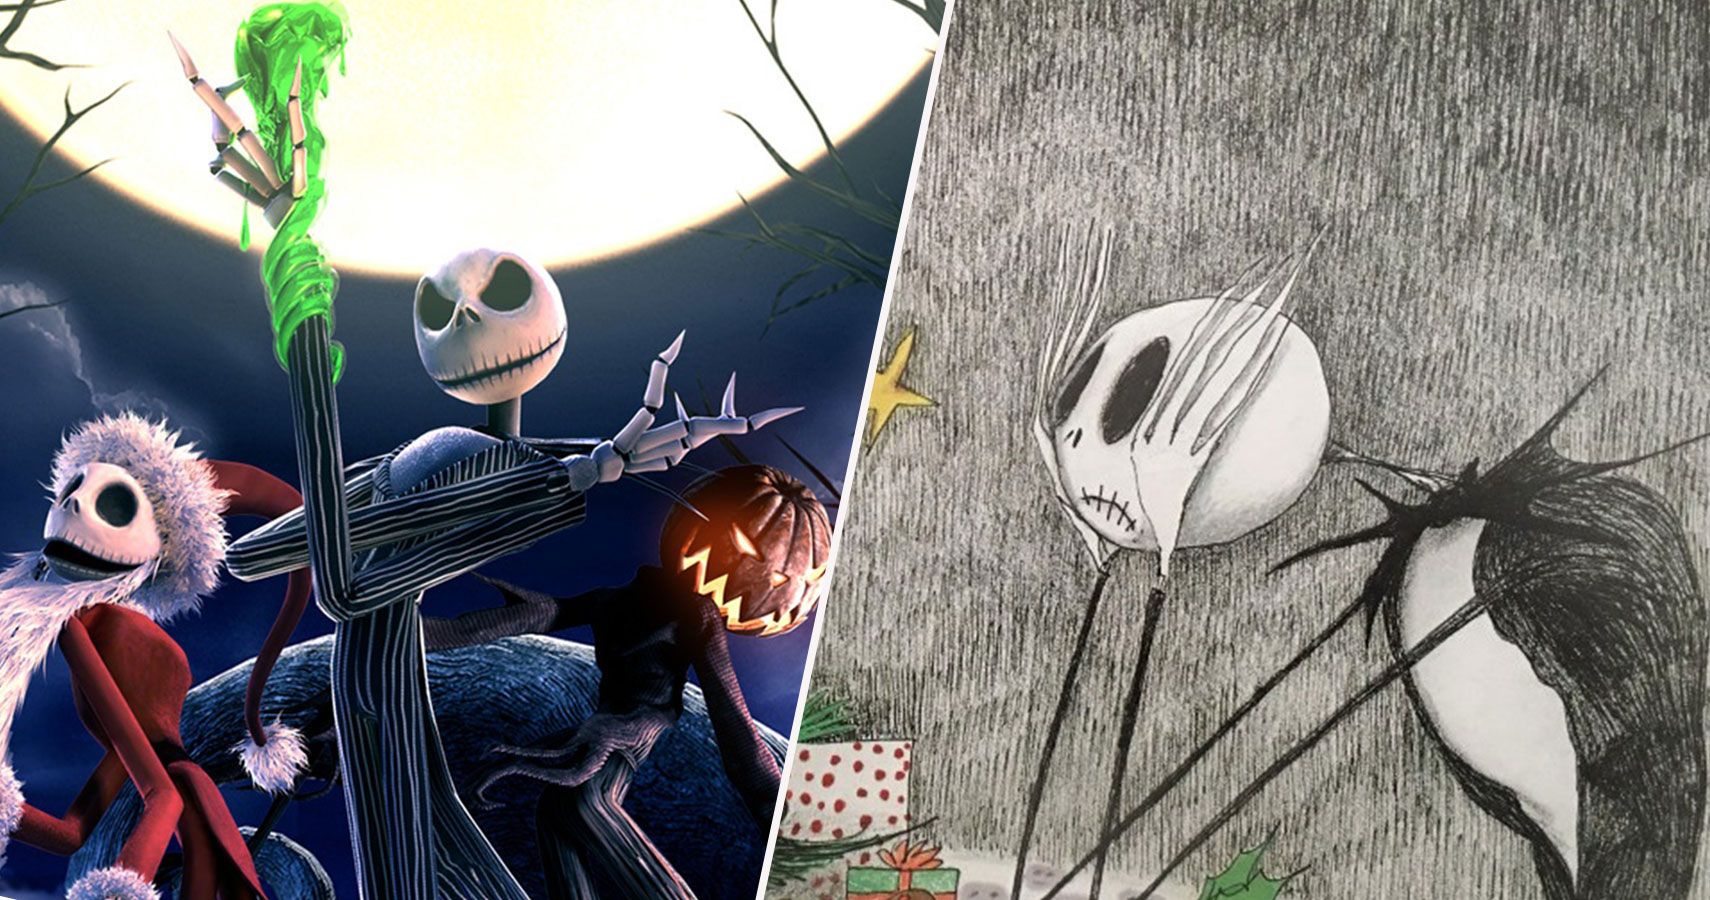 Nightmare Before Christmas' Was Forced to Cut Joke About Tim